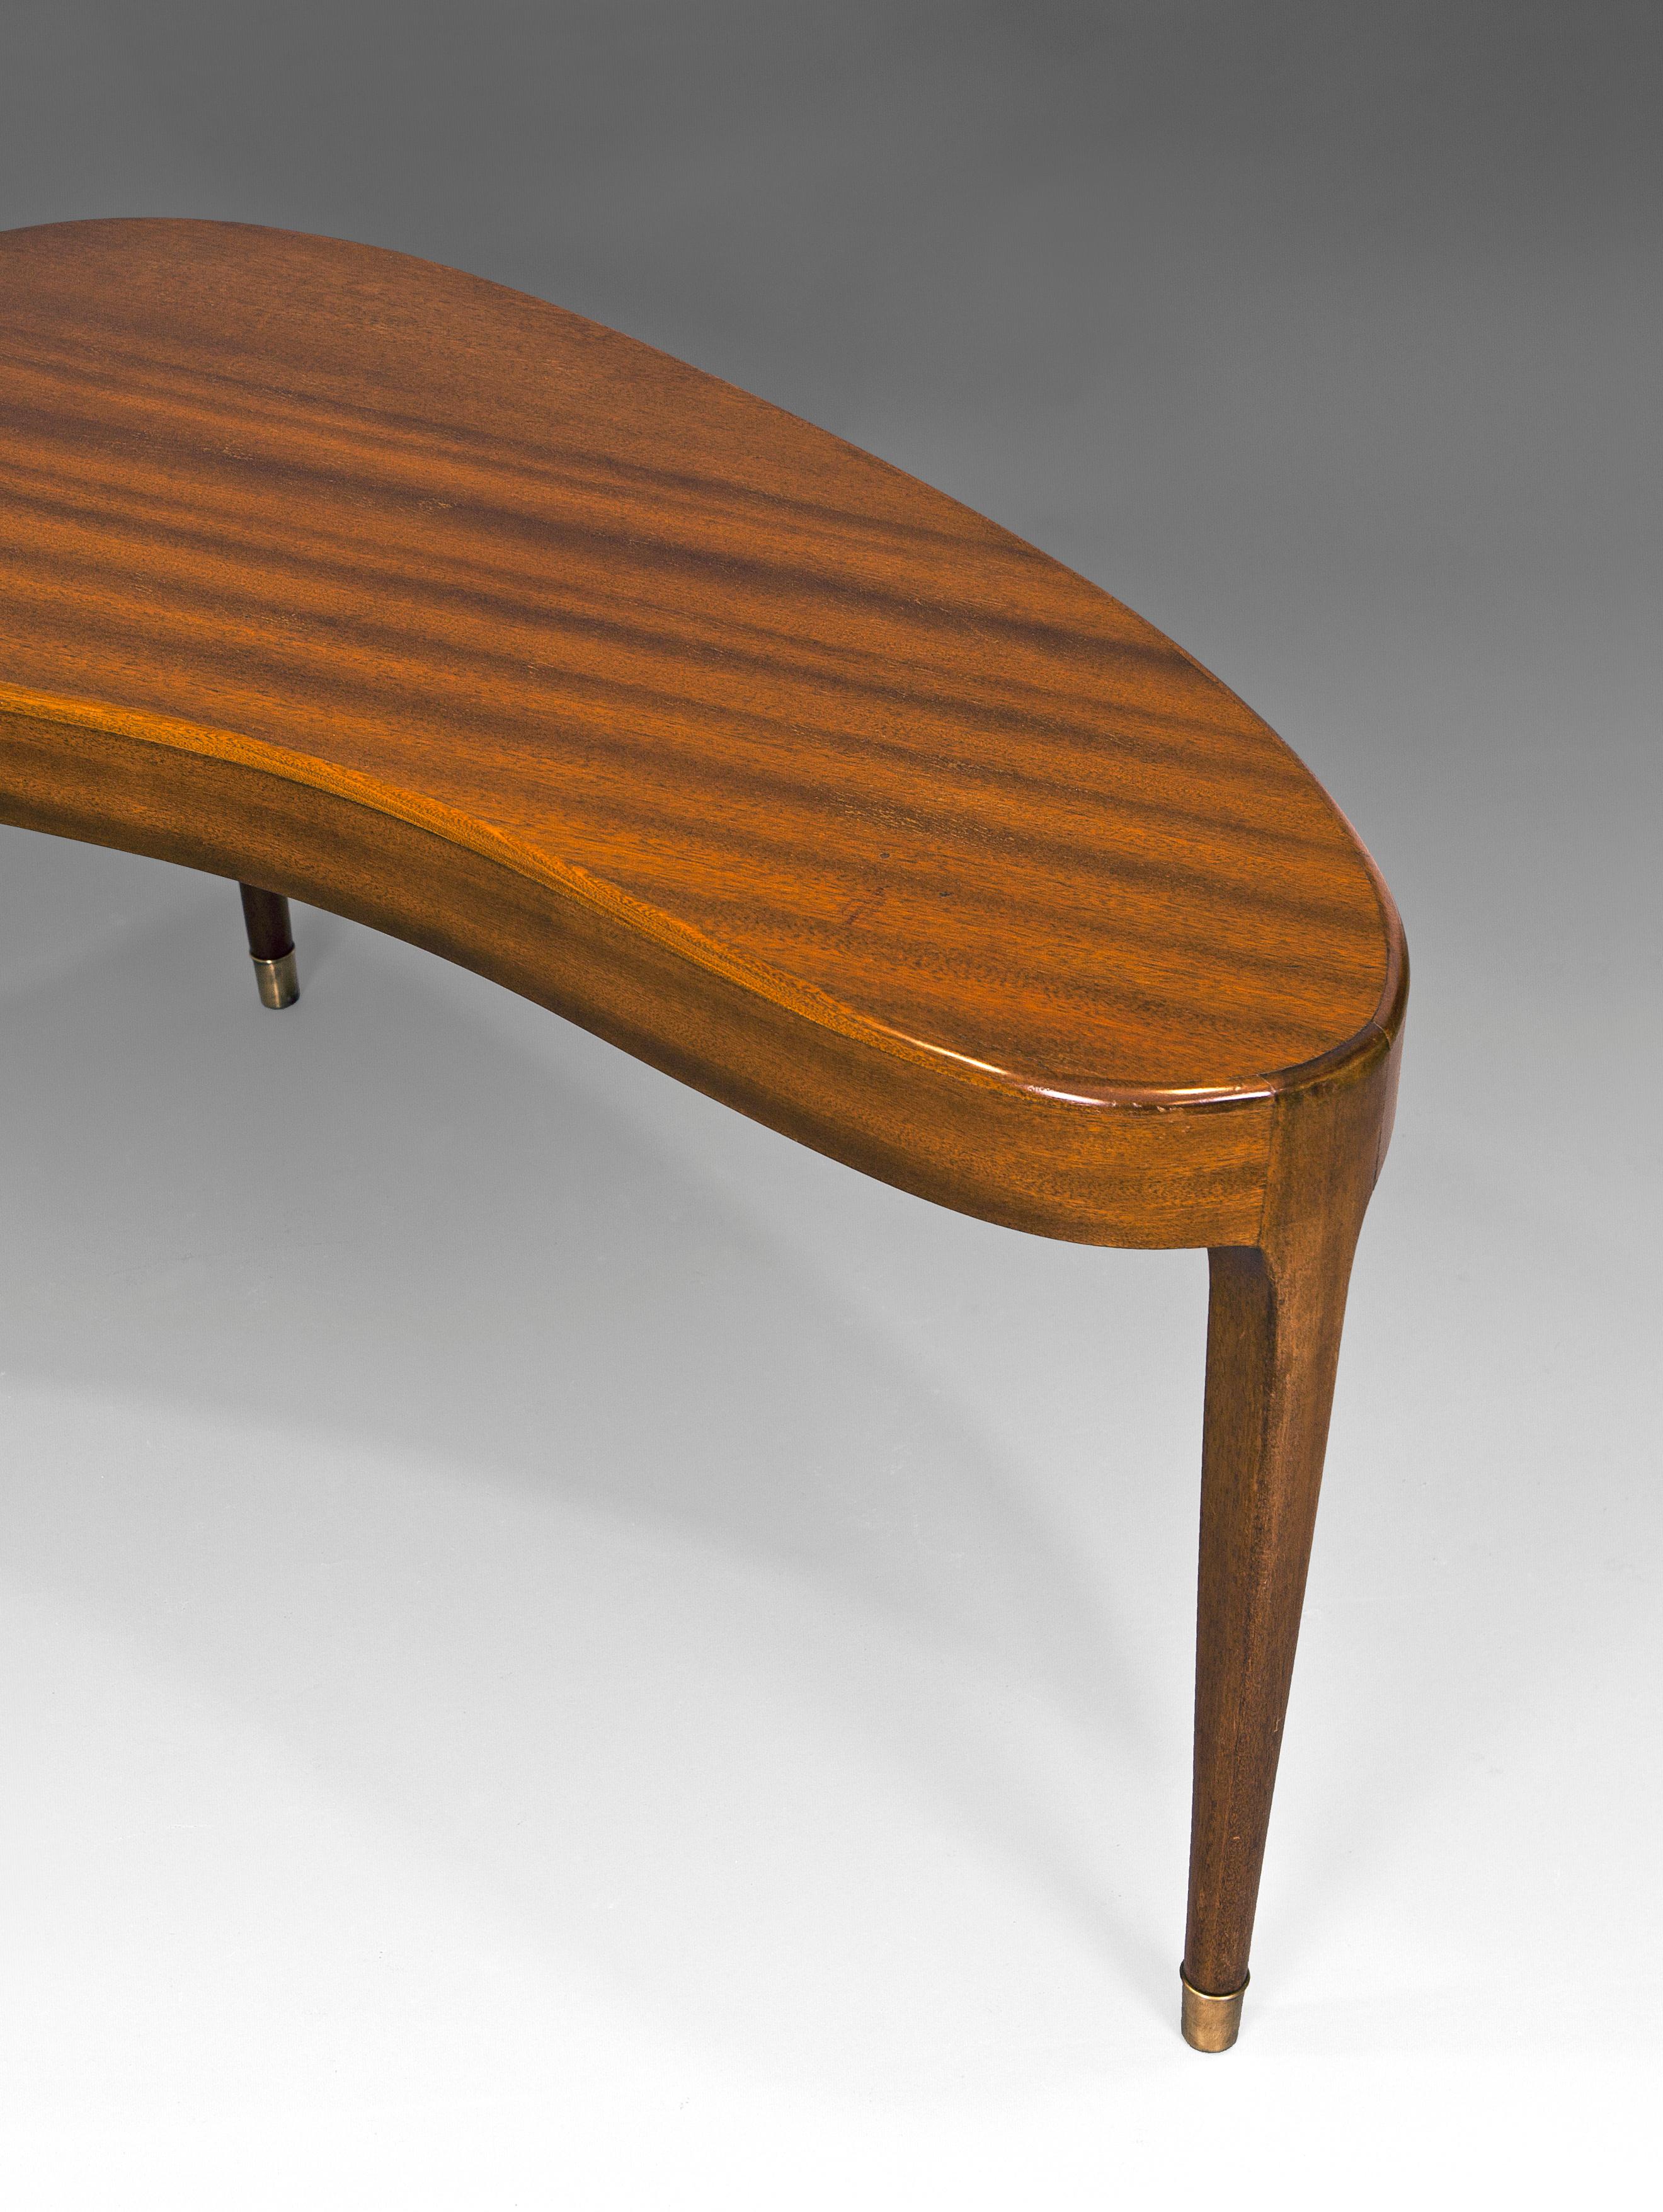 Danish 1950s Large Kidney Shaped Coffe Table in Mahogany